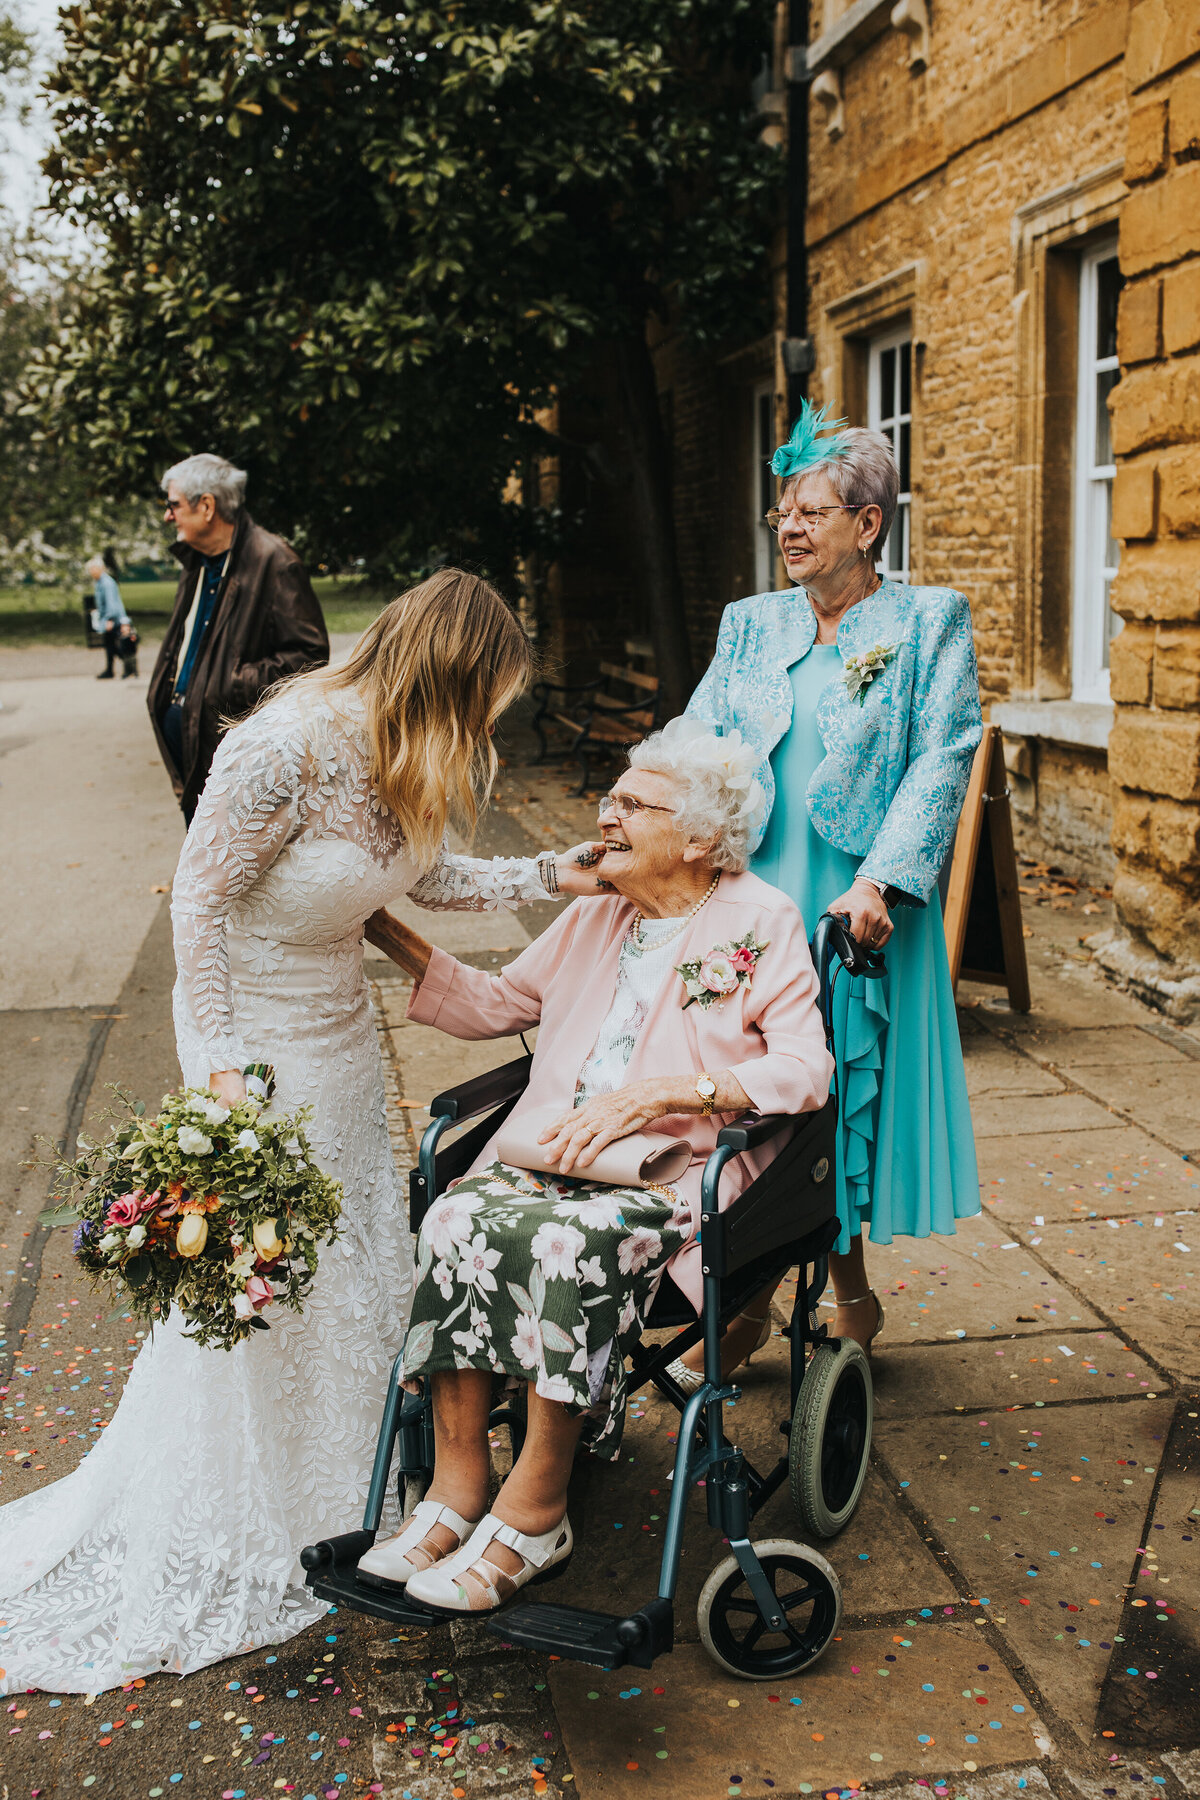 Nottingham Fun Documentary Candid Untraditional Wedding Photography - Sophie Ann Photography Wedding Photography at Abington Park Museum